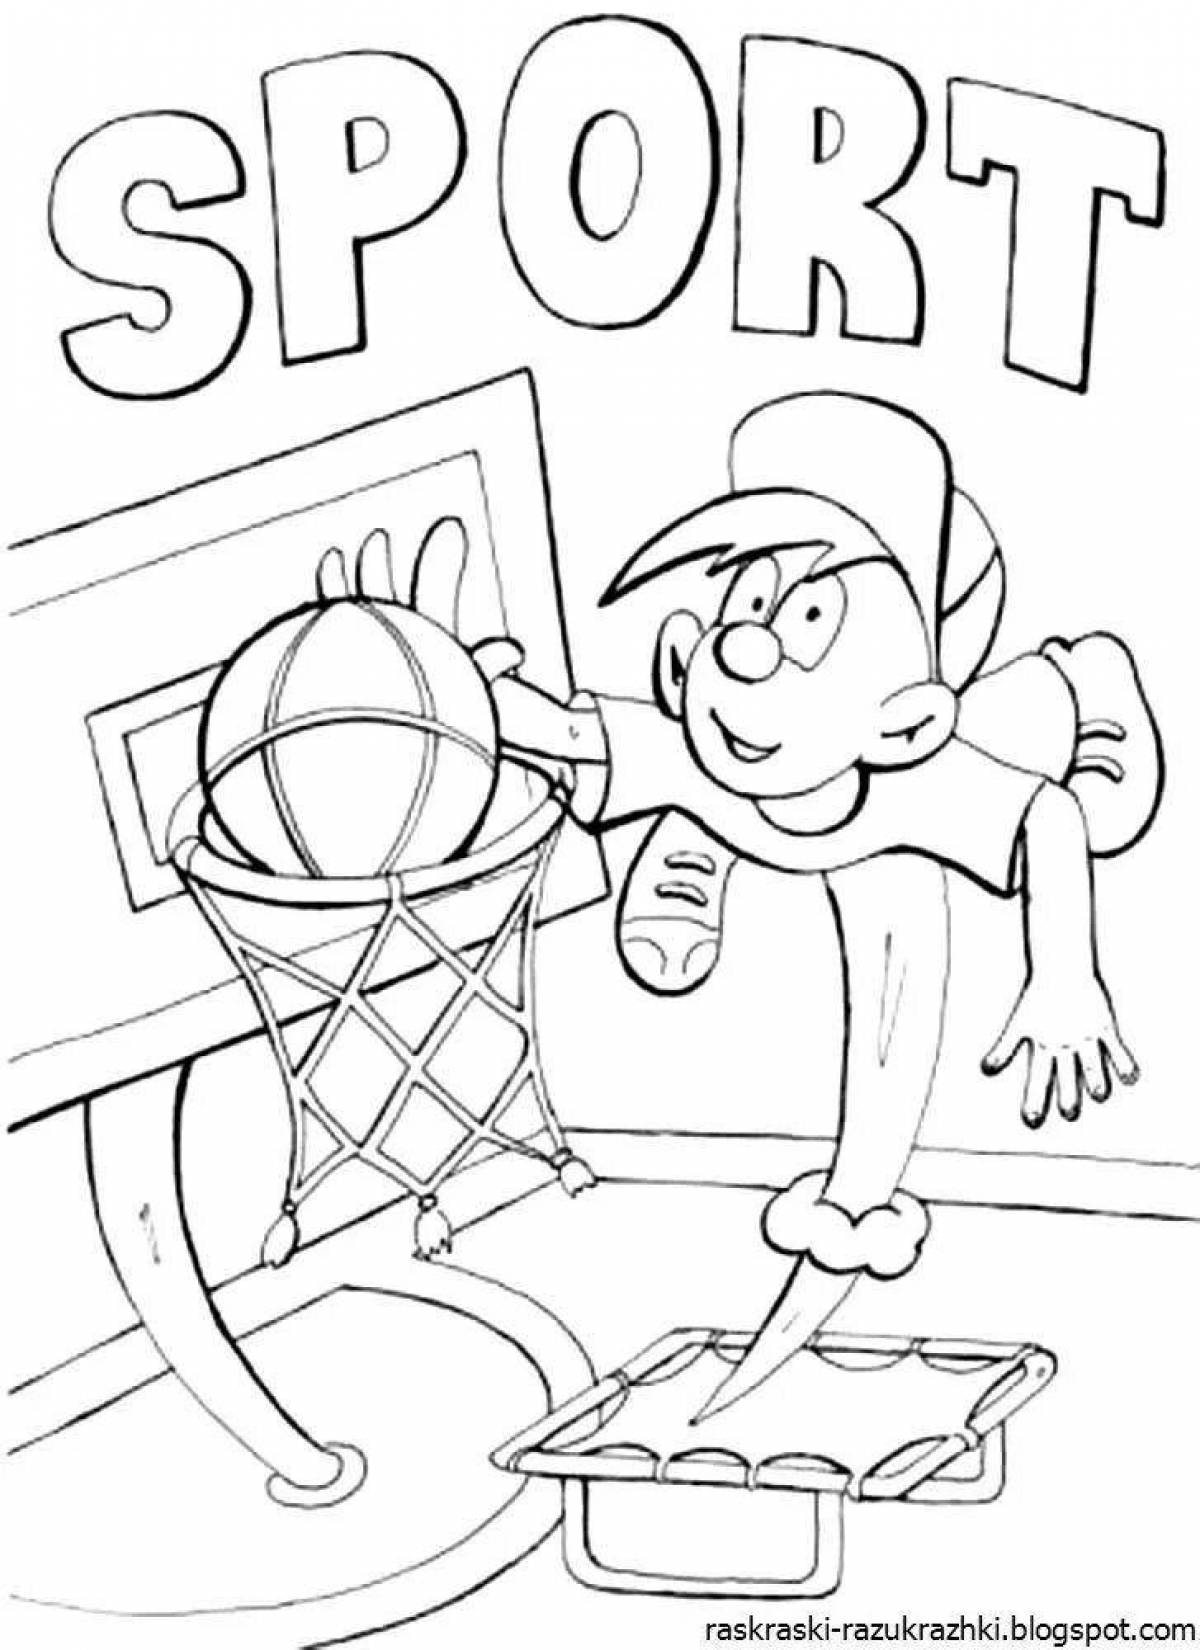 Inspirational healthy lifestyle coloring page